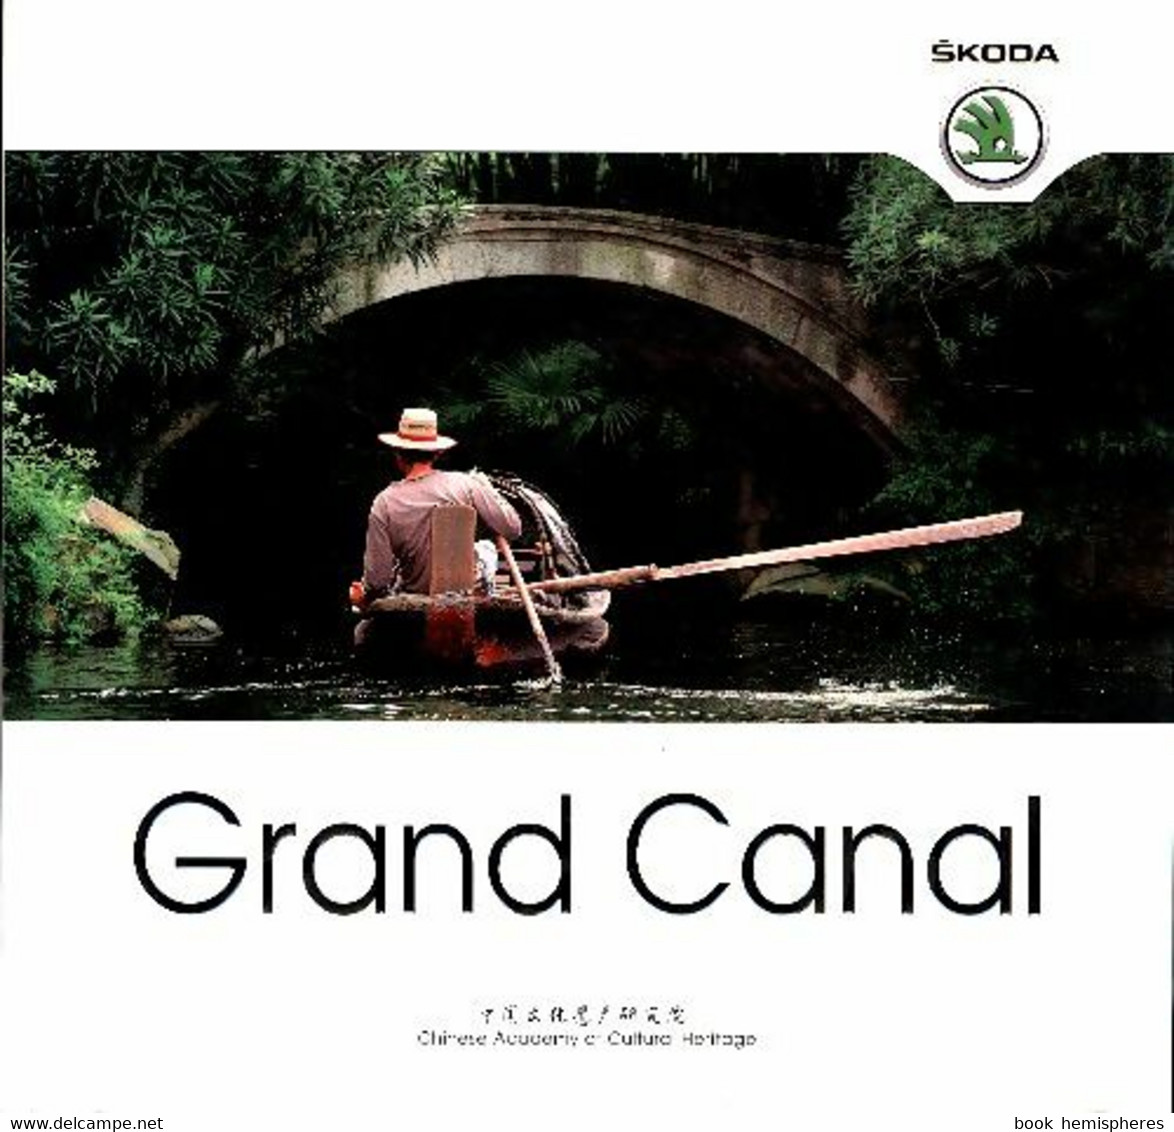 Grand Canal. Chinese Academy Of Cultural Heritage De Collectif (0) - Motorfietsen